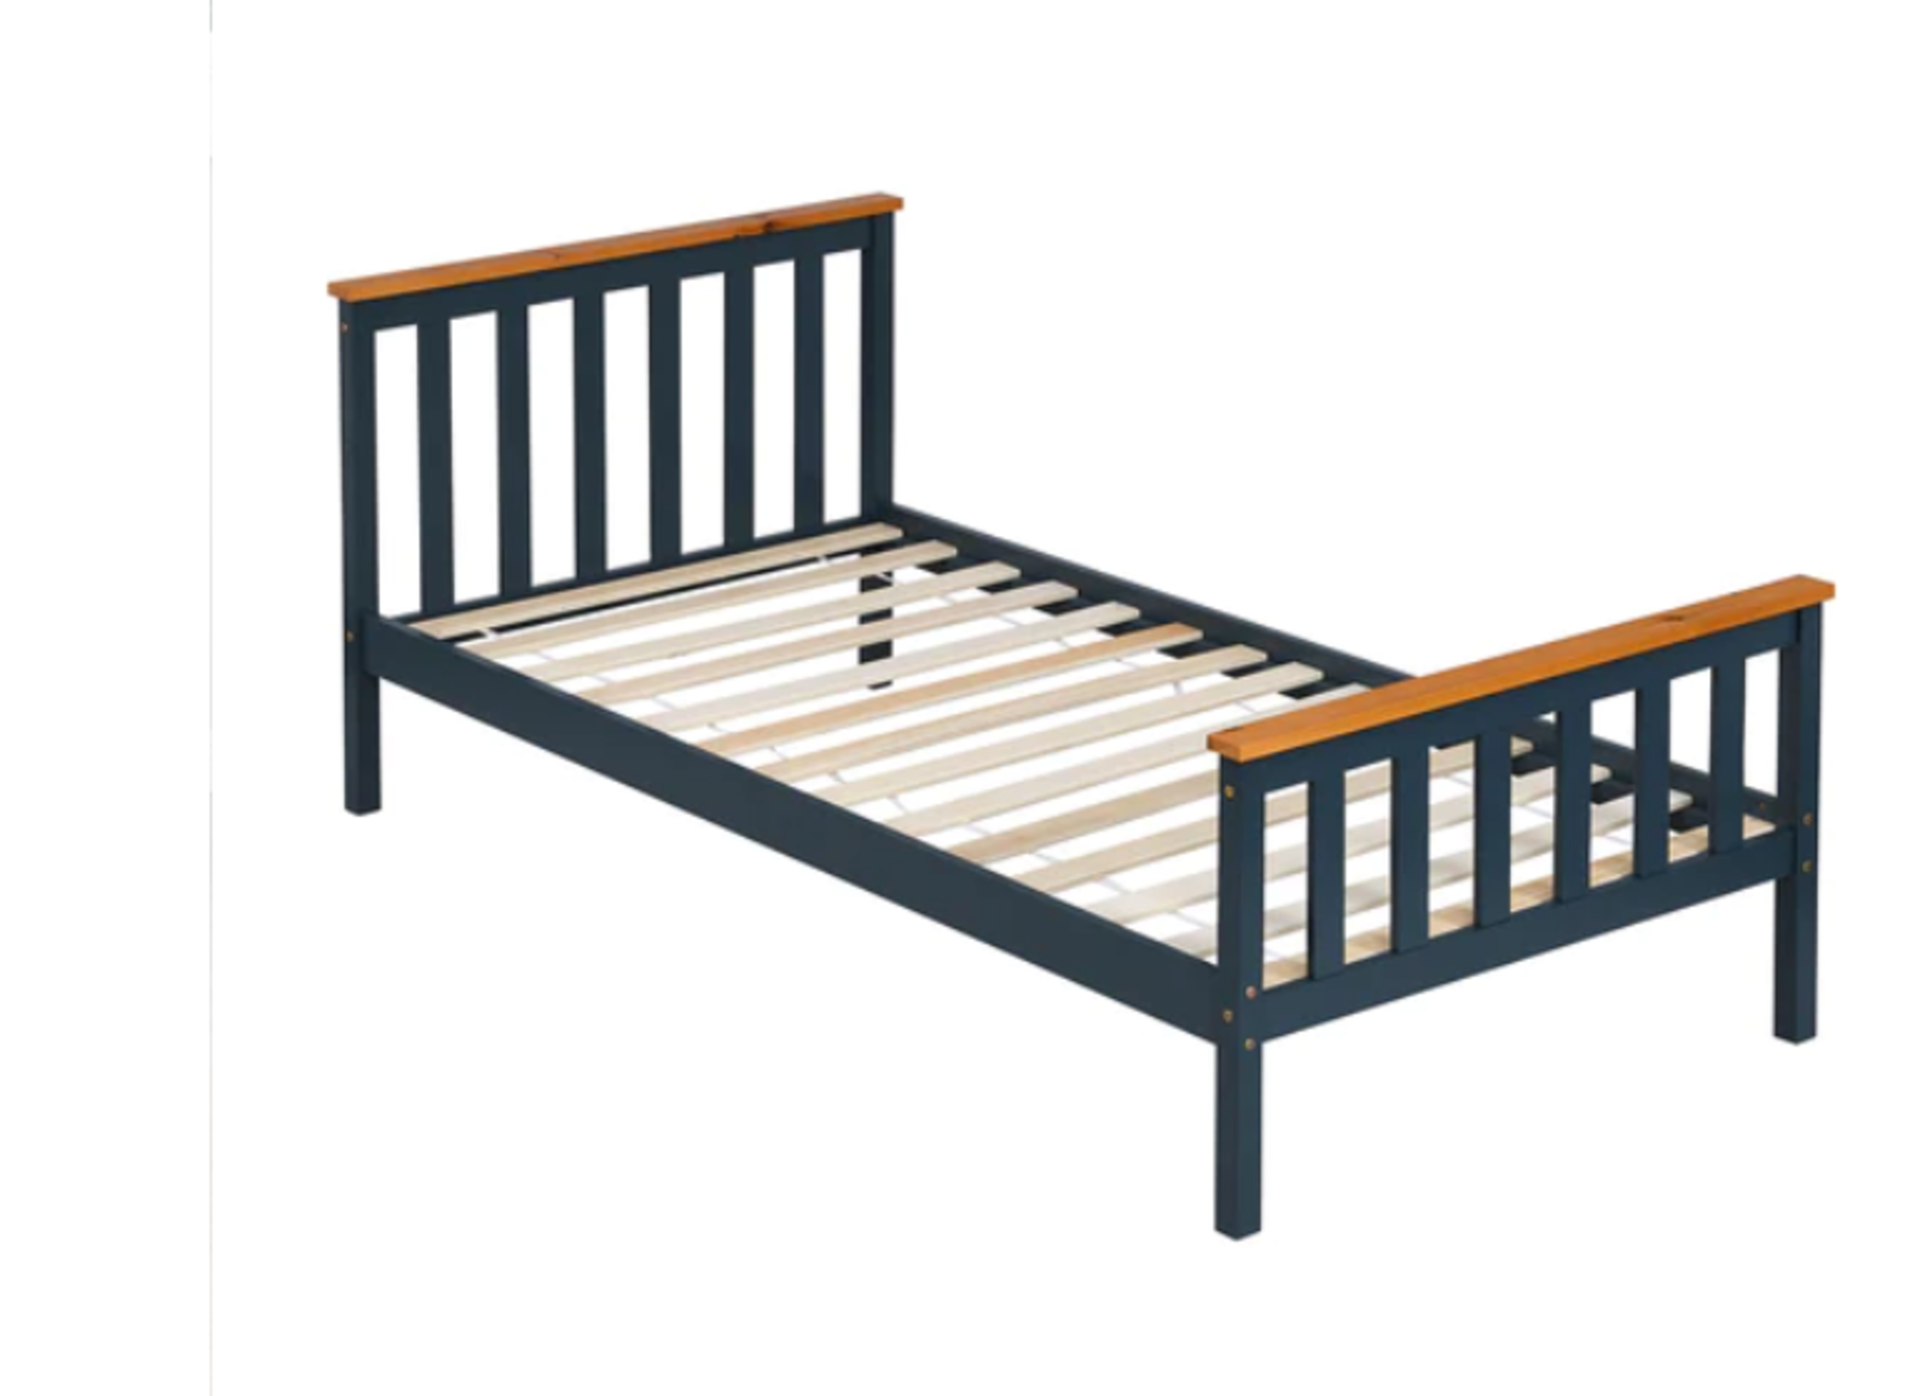 Marta Solid Wooden Shaker Style Bed in White & Oak Size Double. - SR6. Our Marta bed frame